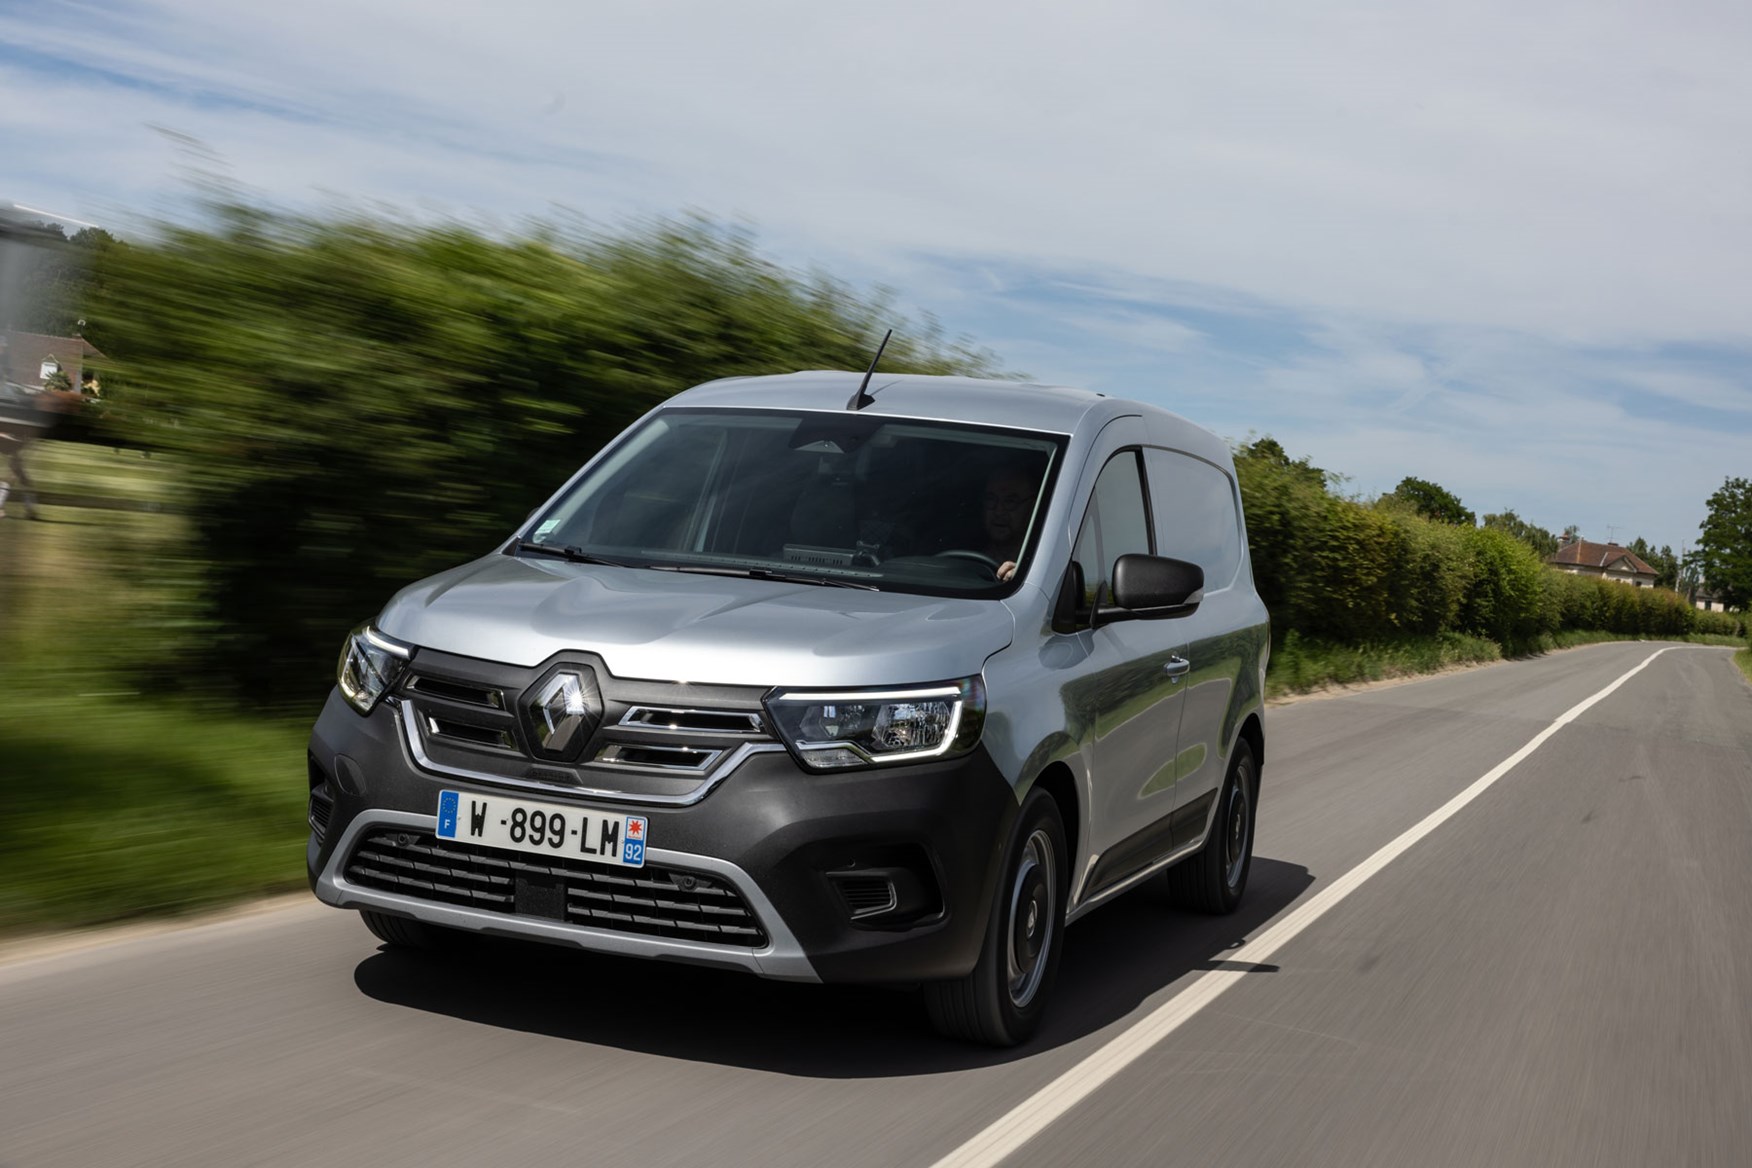 New Renault Kangoo - pricing, trims and engine details confirmed